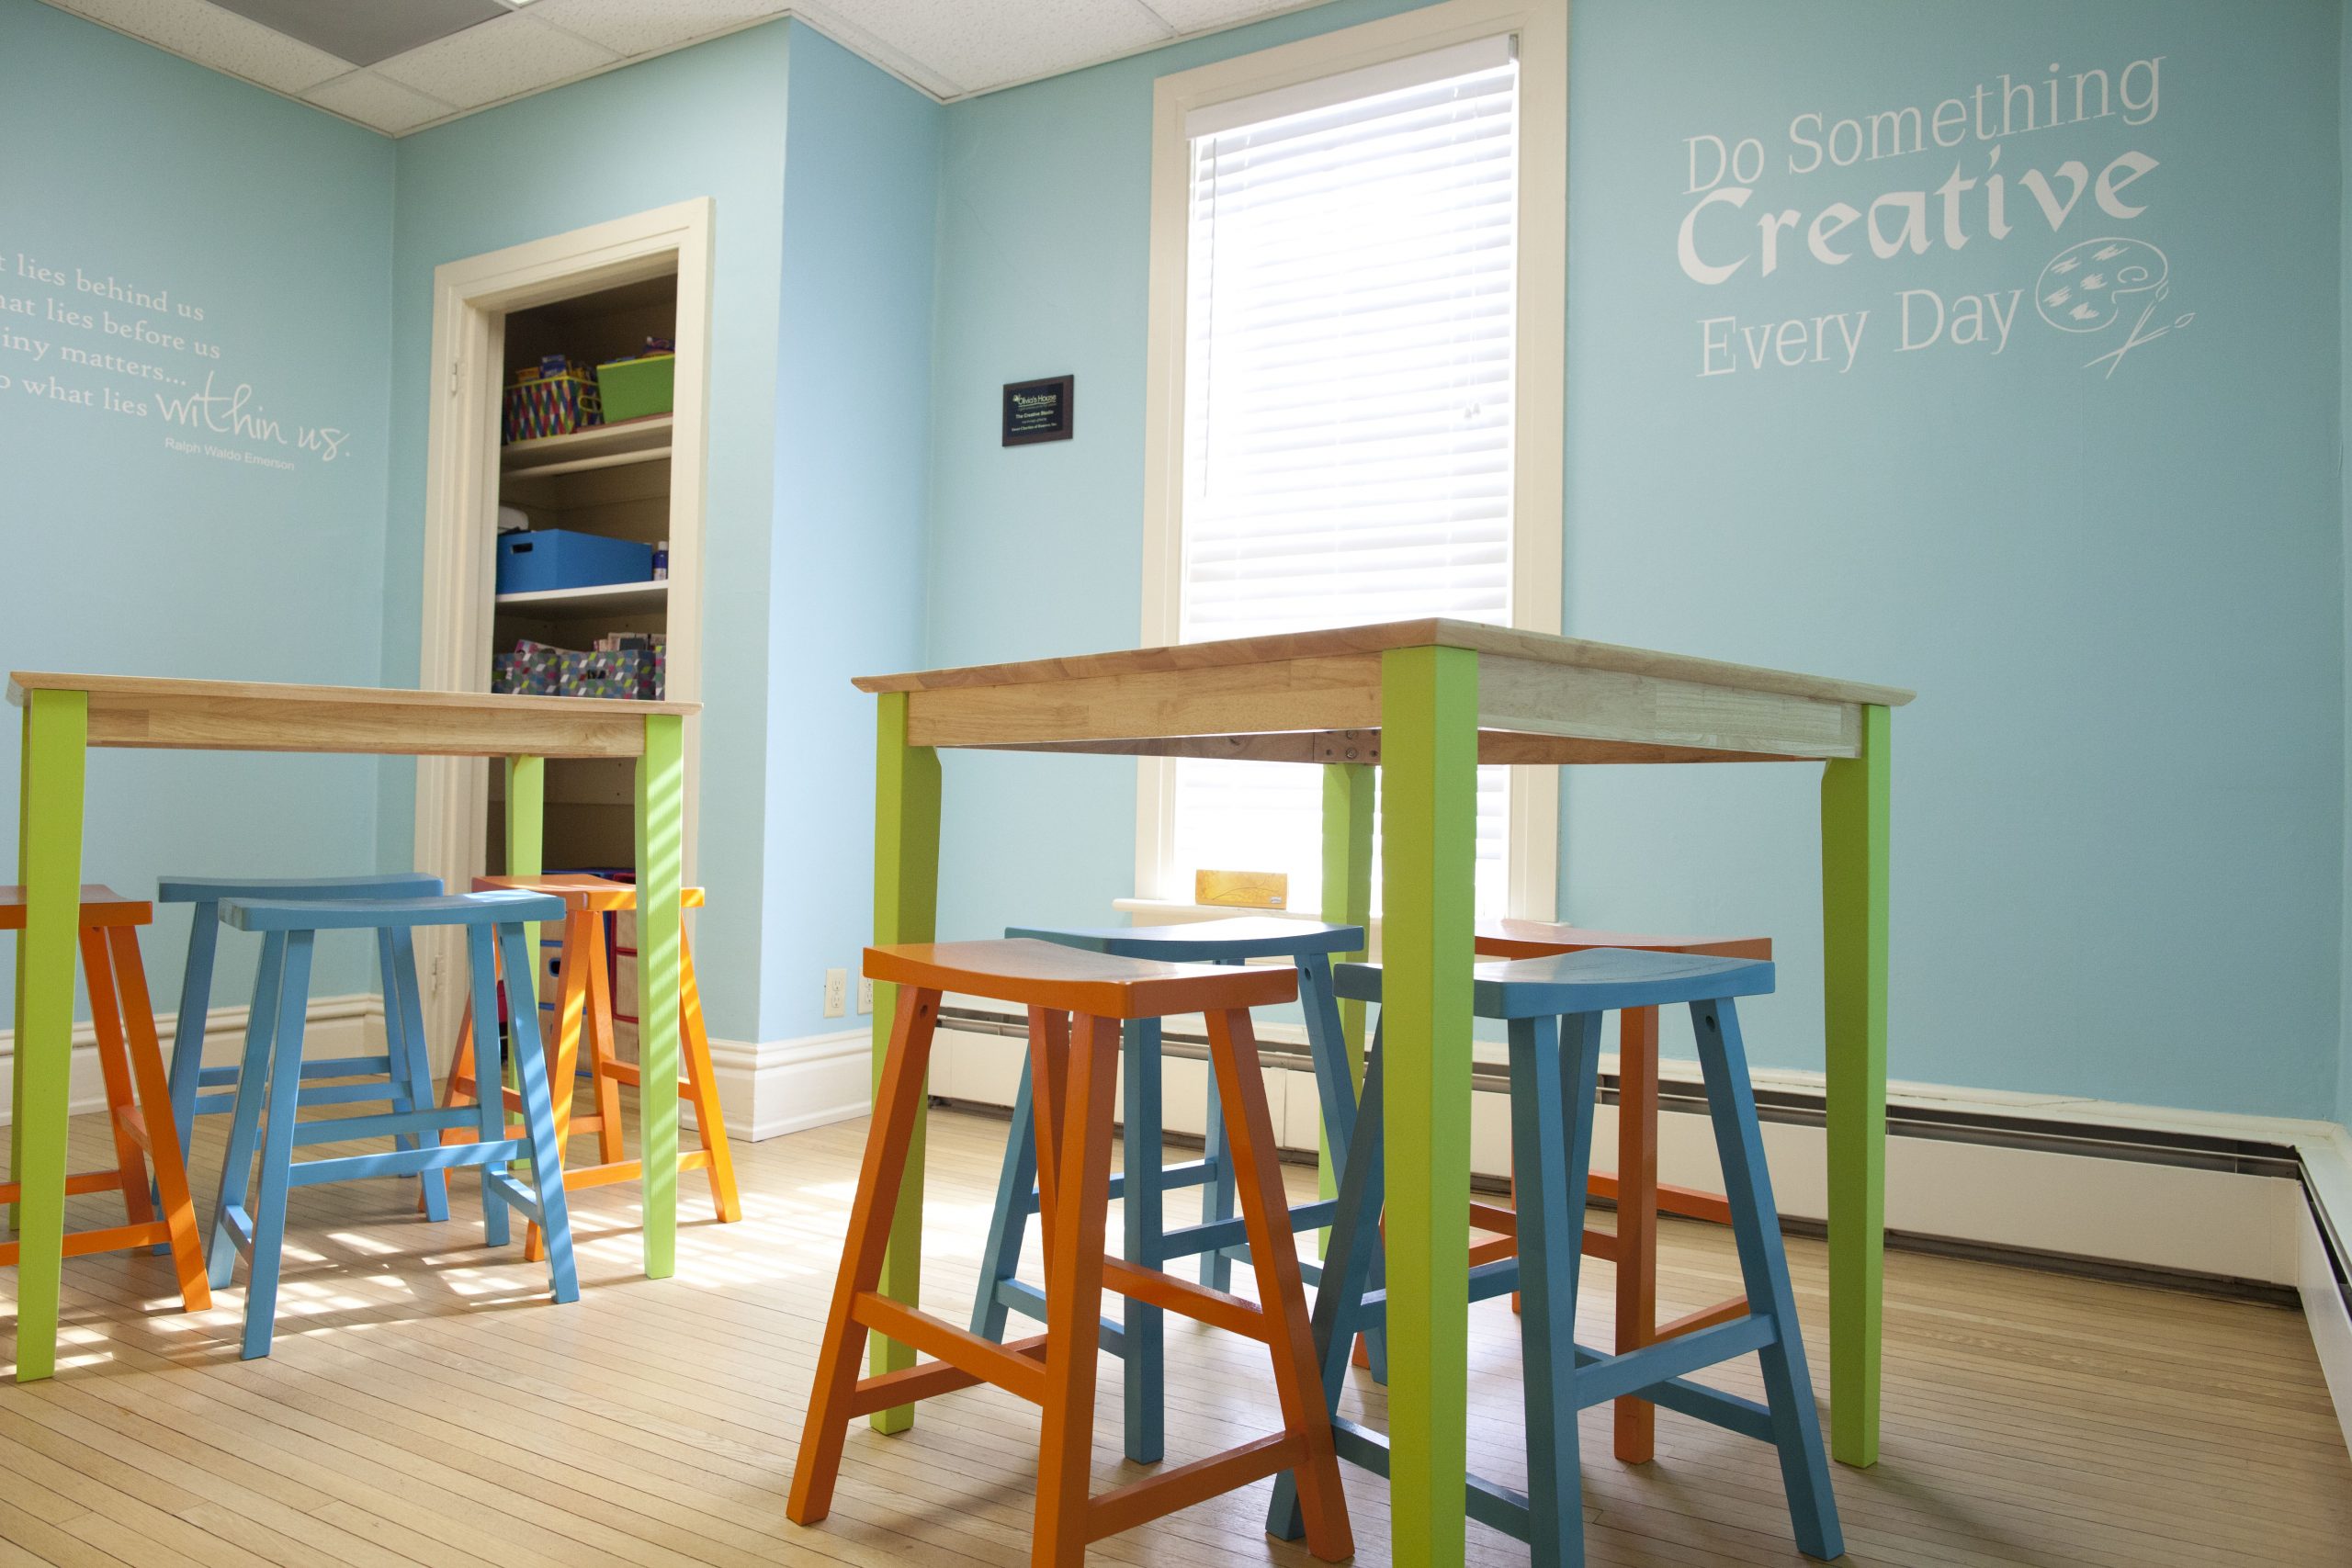 The Sweet Charities are the proud sponsors of our special art area for the older children in the program. It is a calm space complete with a computer and flat screen television wired to the internet. It functions as a creative space, complete with a closet of art supplies.